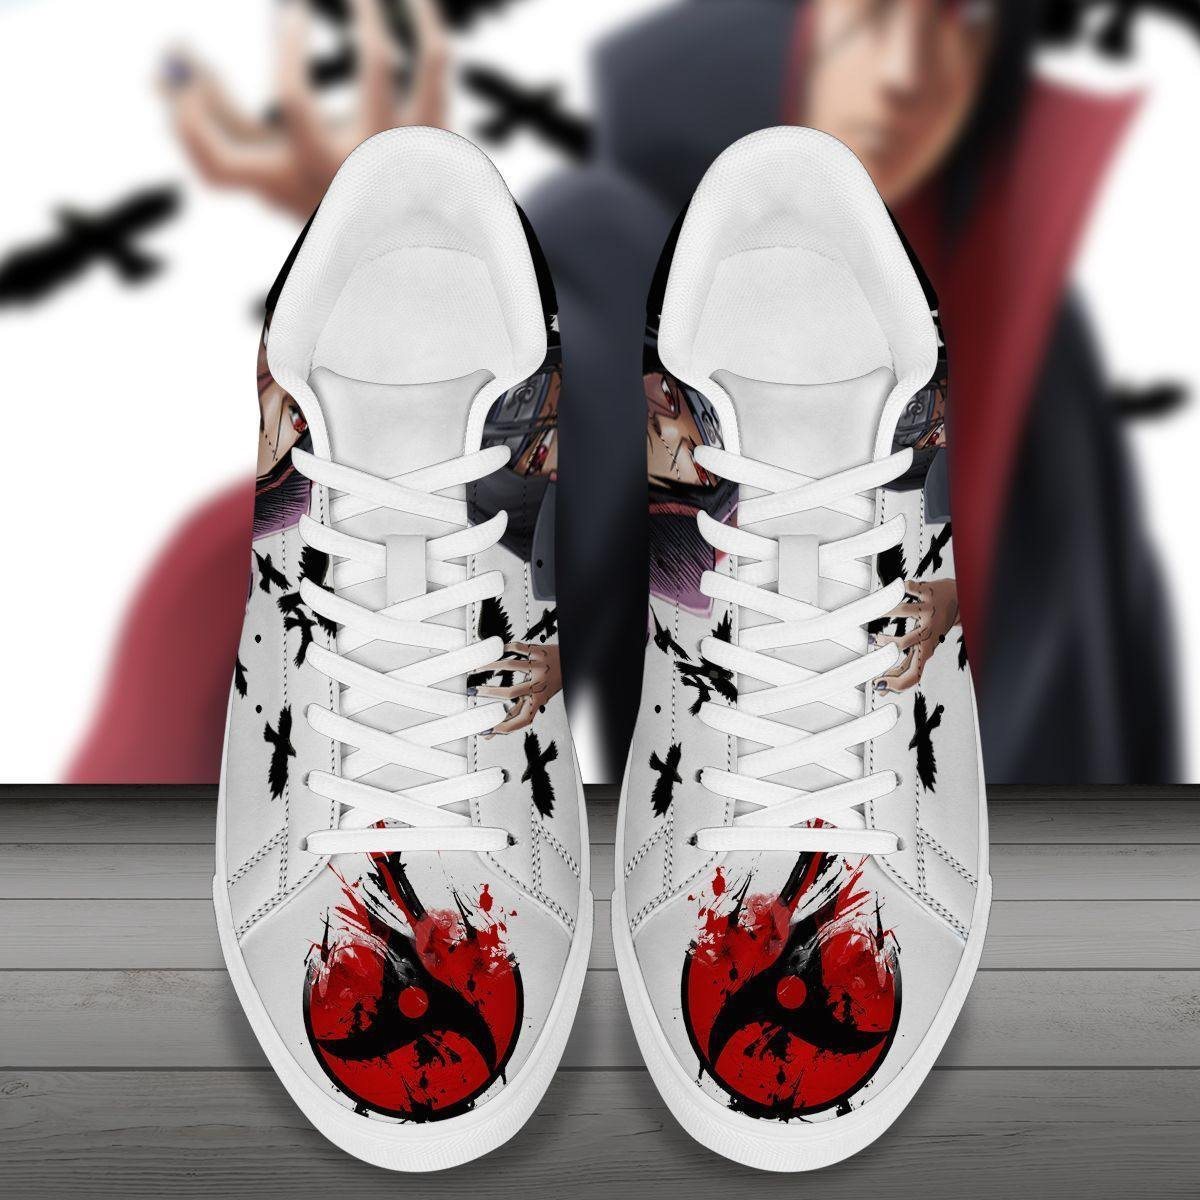 Best selling products] Akatsuki Naruto Anime Green High Top Shoes